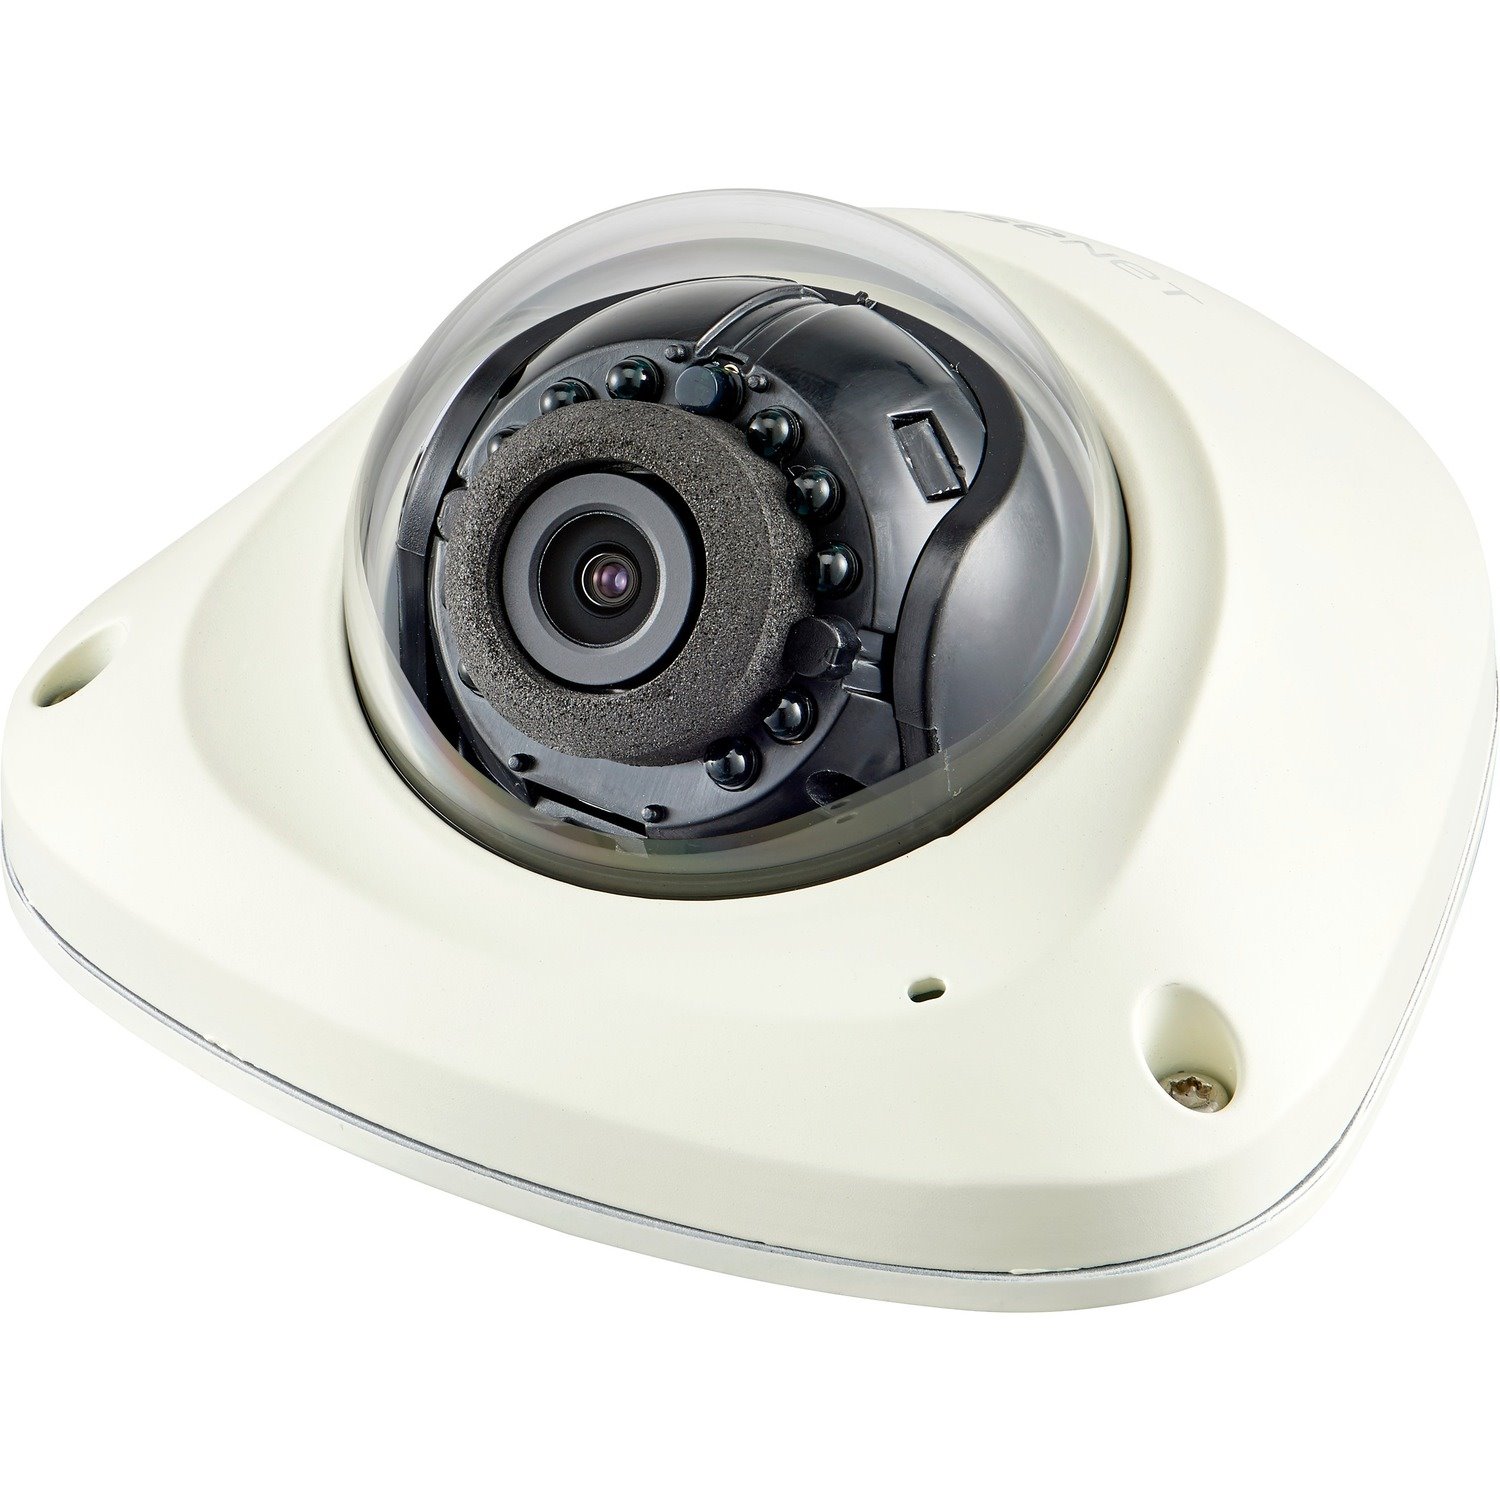 Wisenet QNV-6023R 2 Megapixel Outdoor Full HD Network Camera - Color - Dome